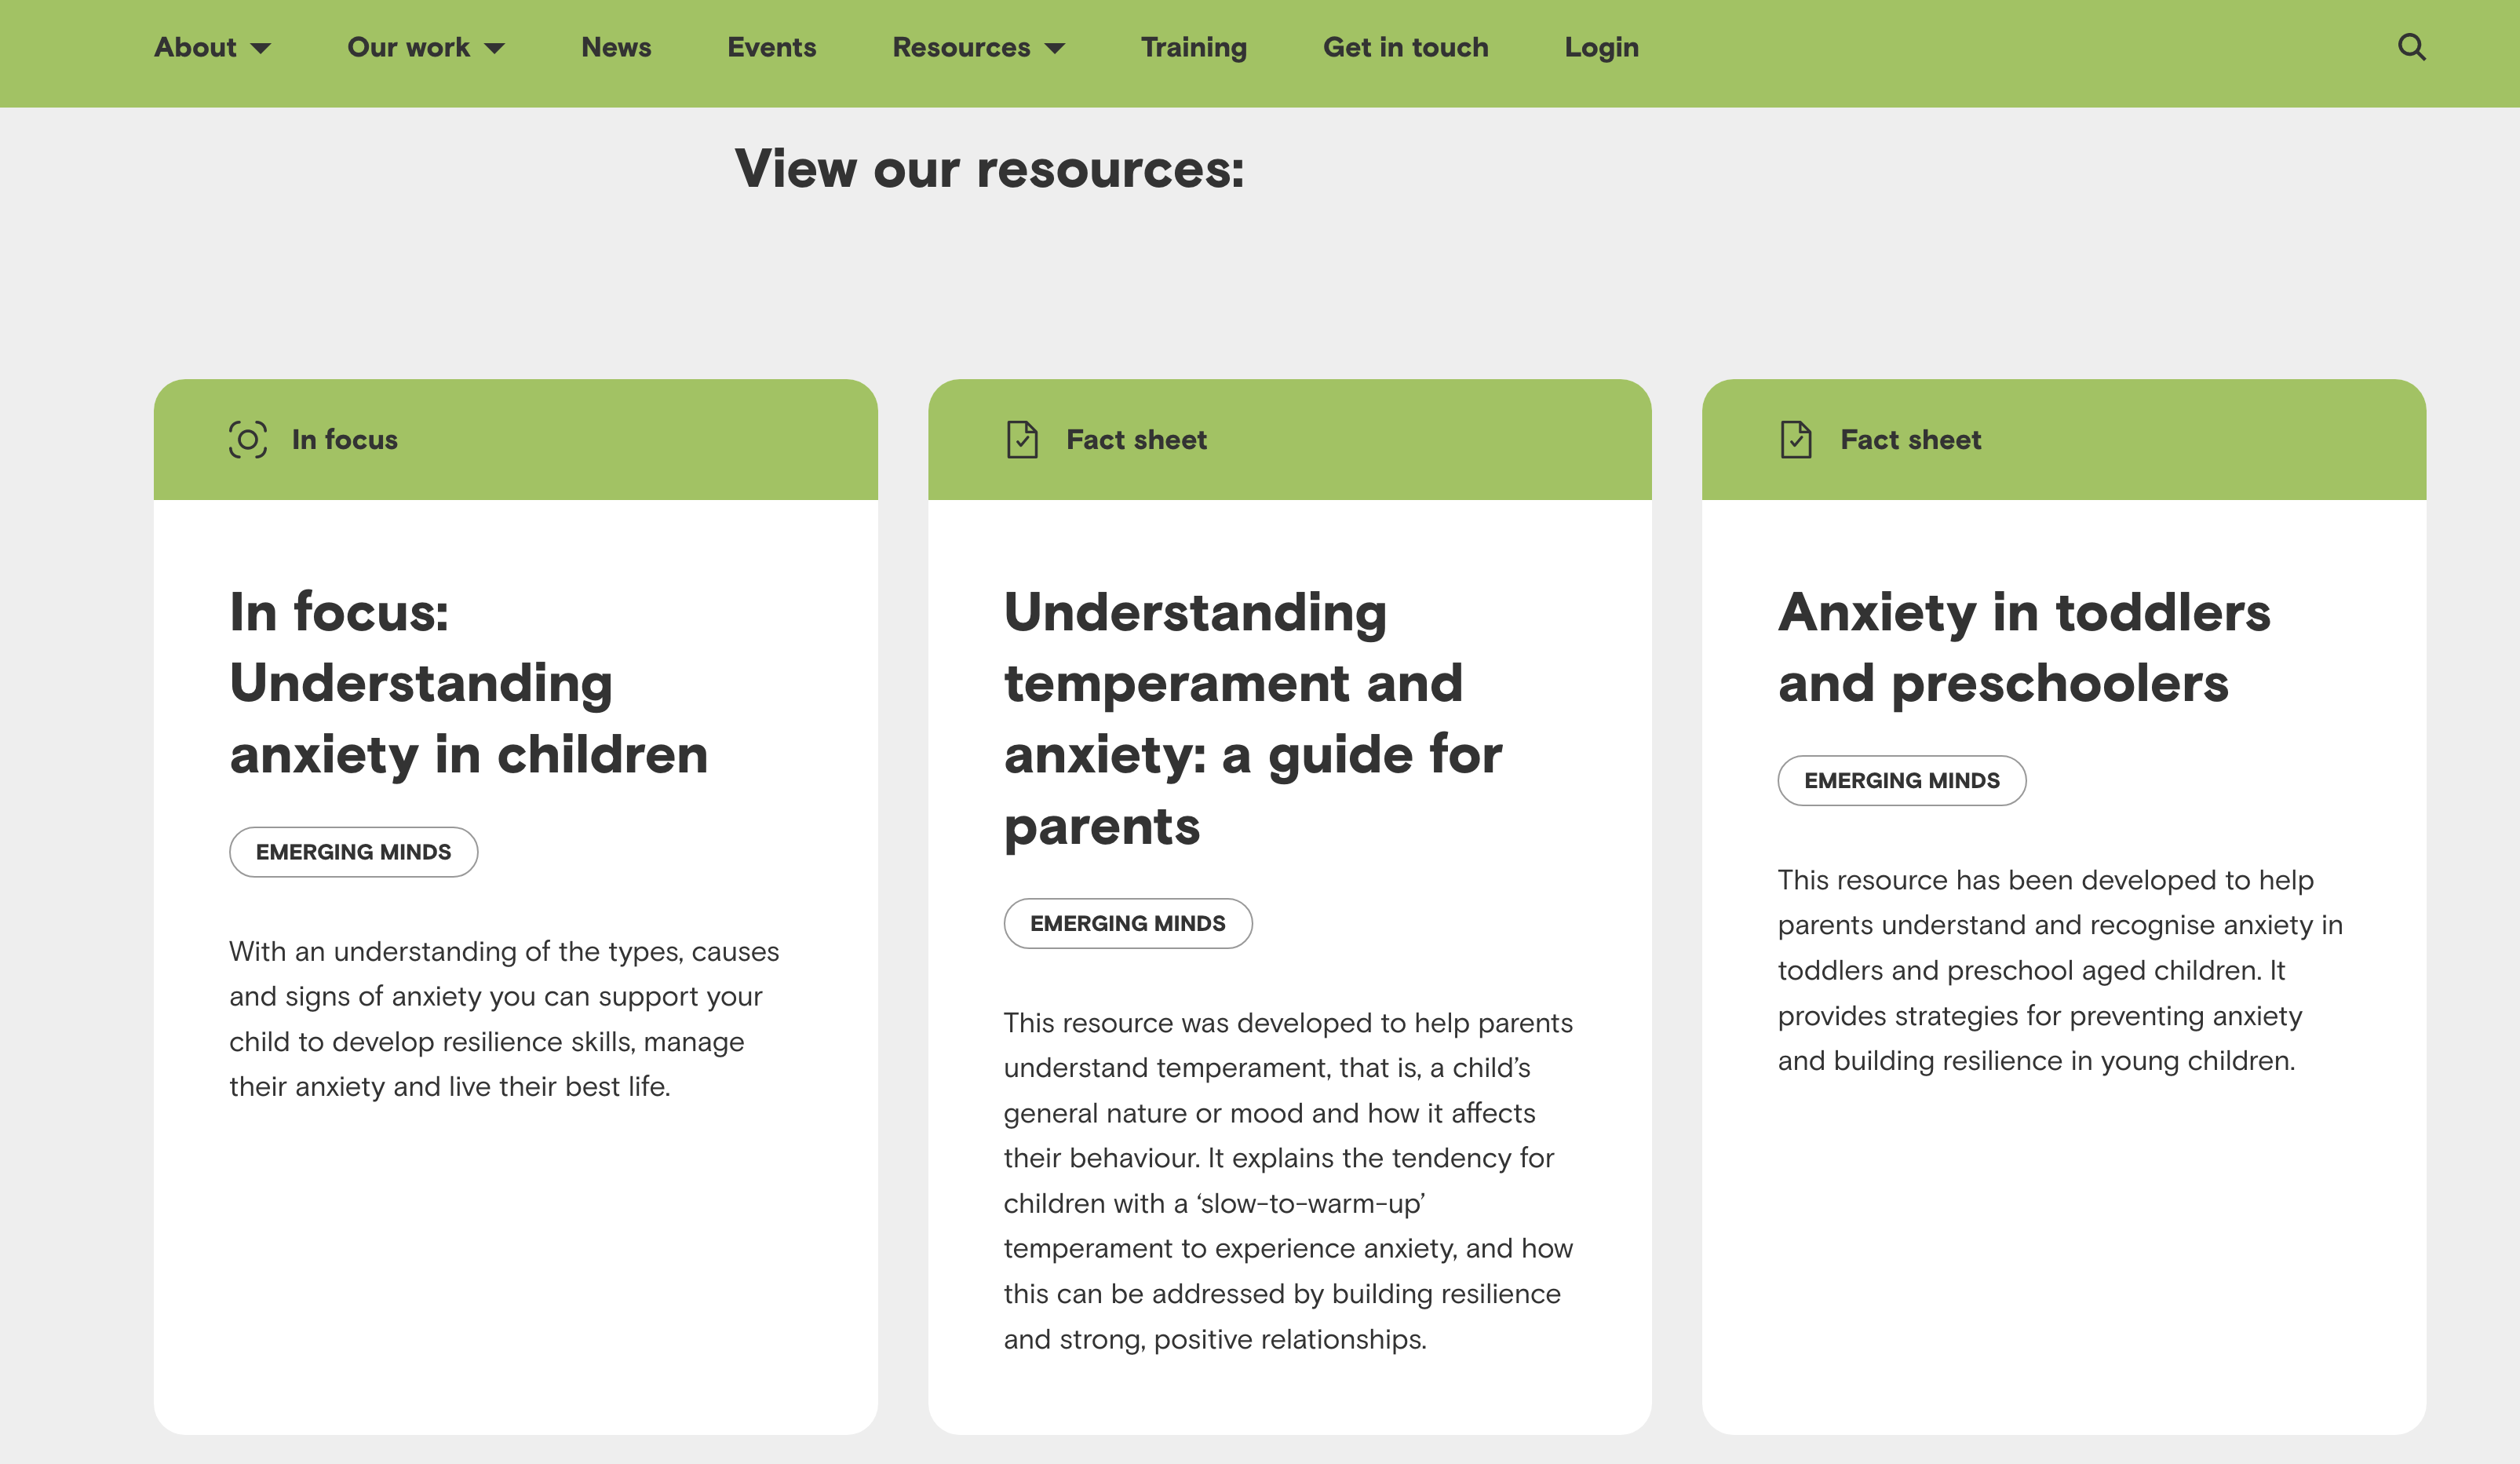 Emerging minds free resources for families